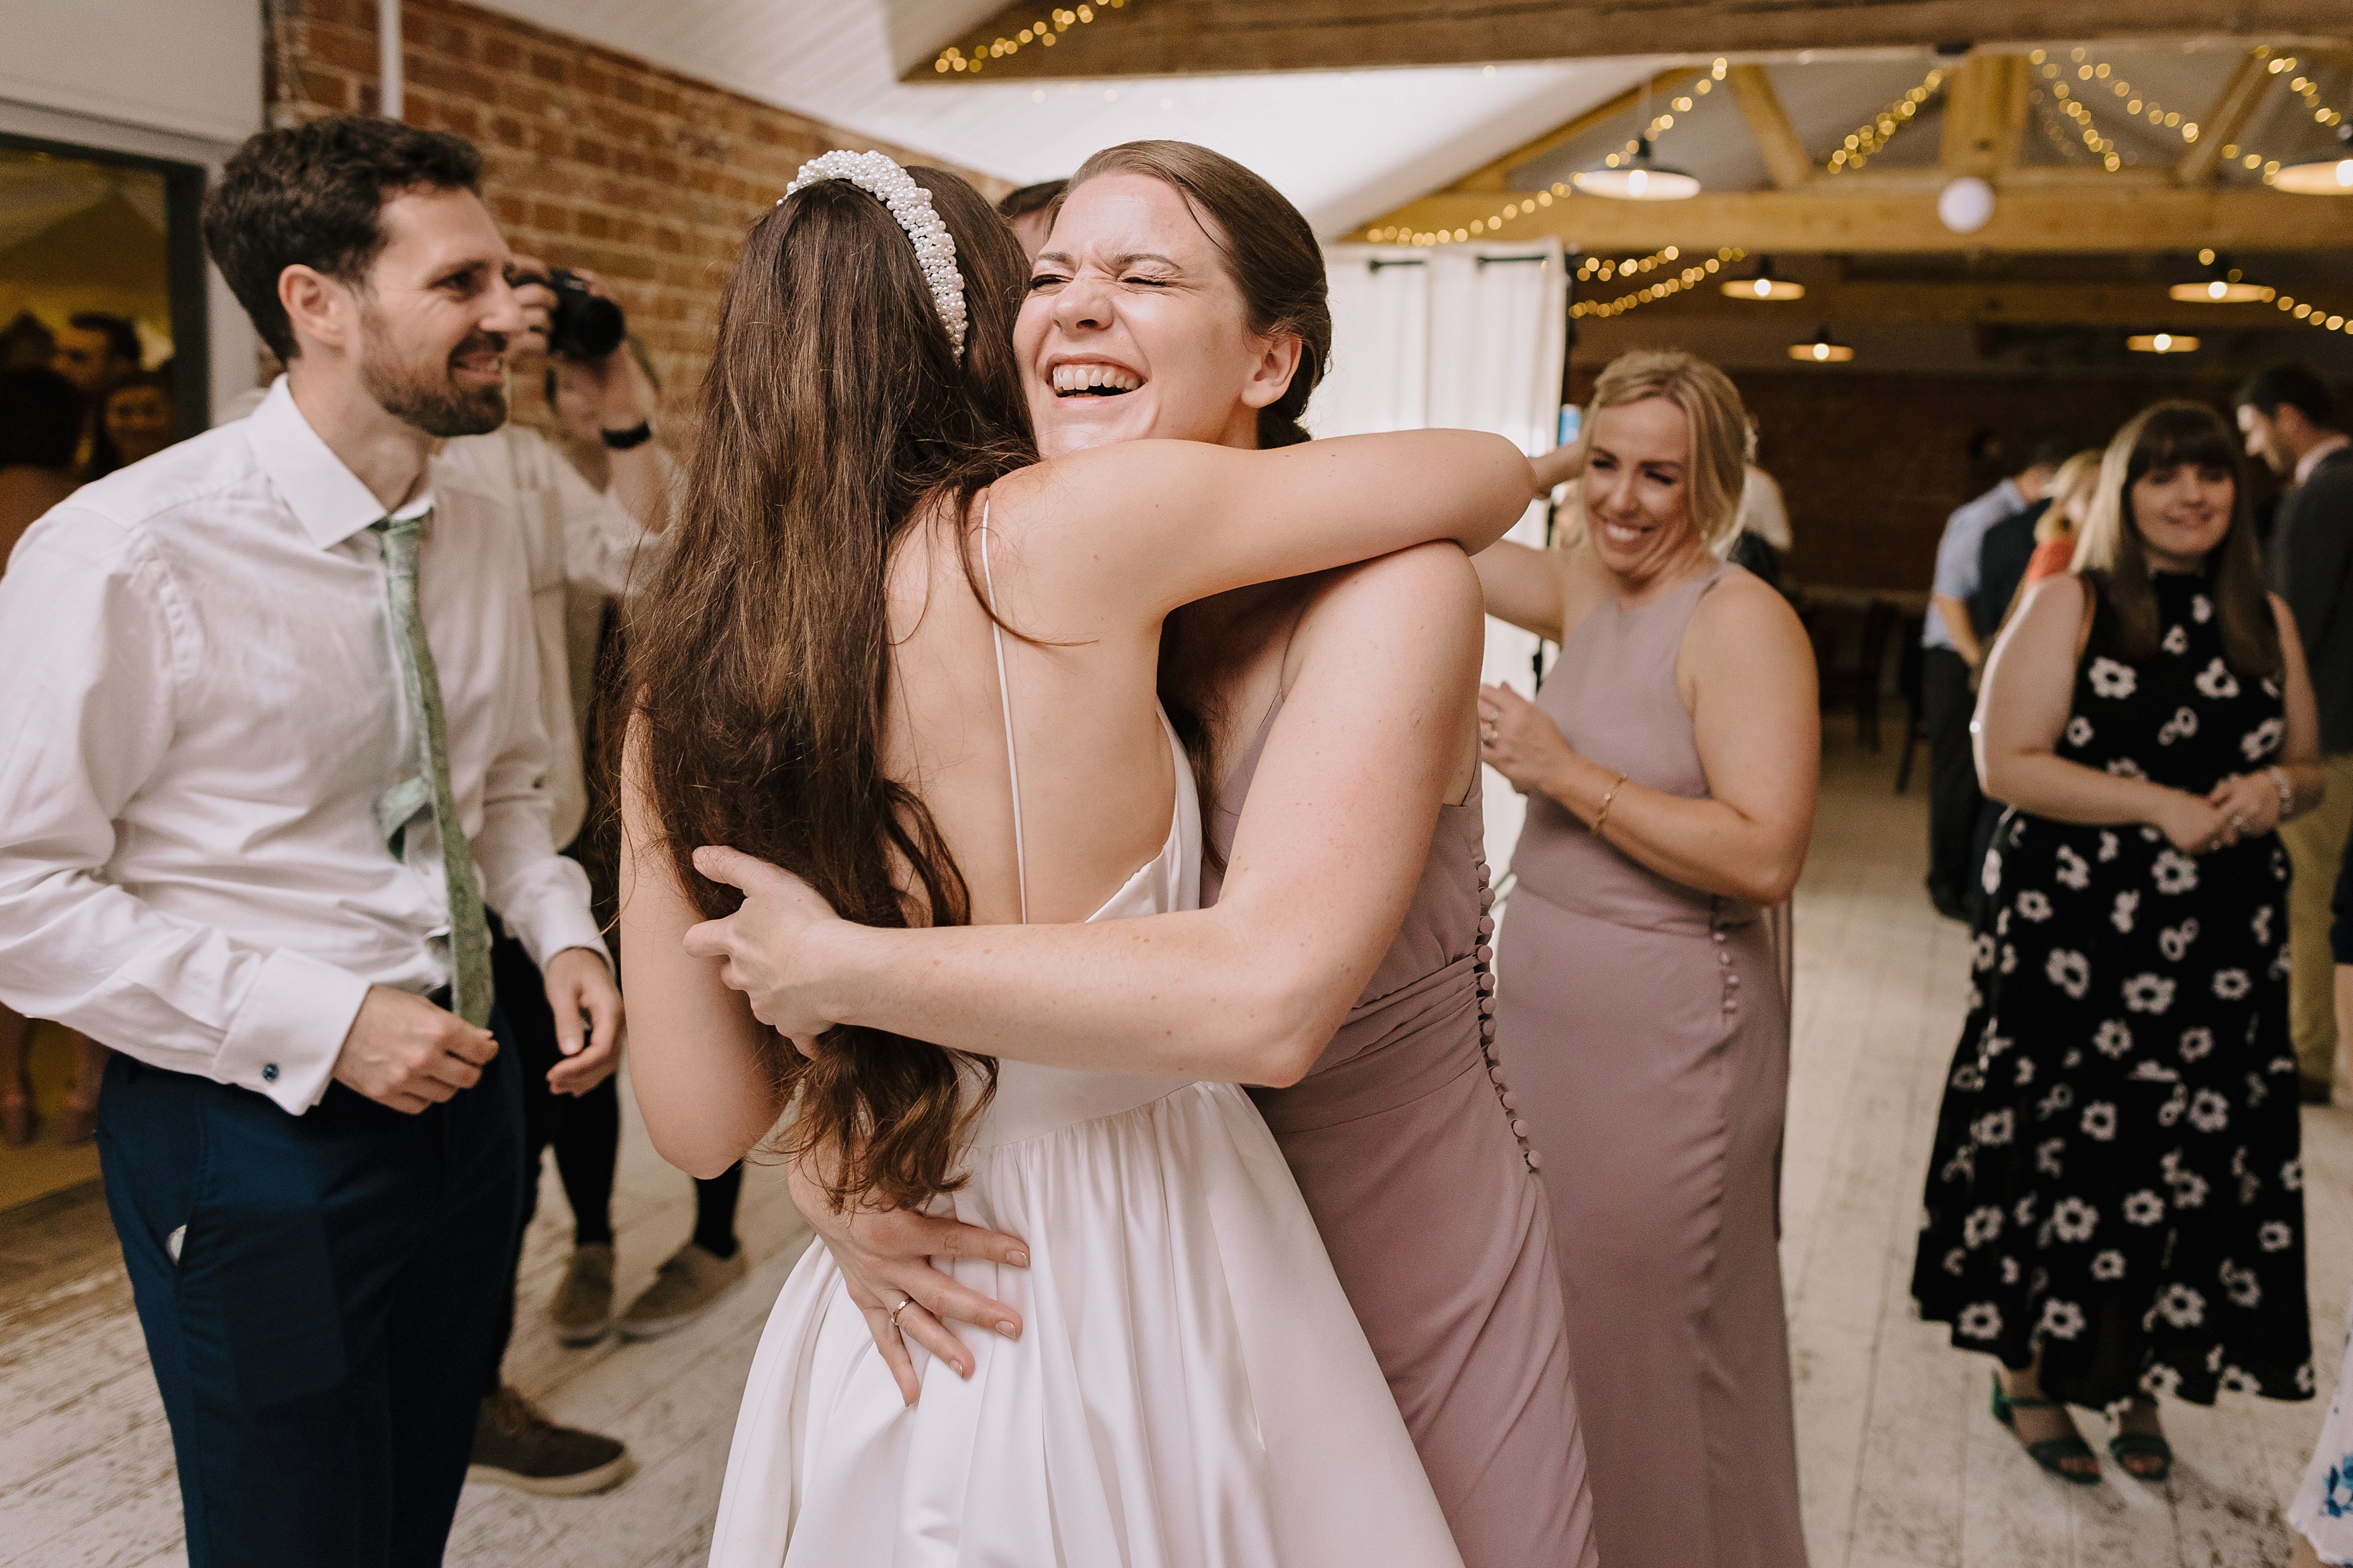 The bride hugging one of her bridesmaids on the dance floor